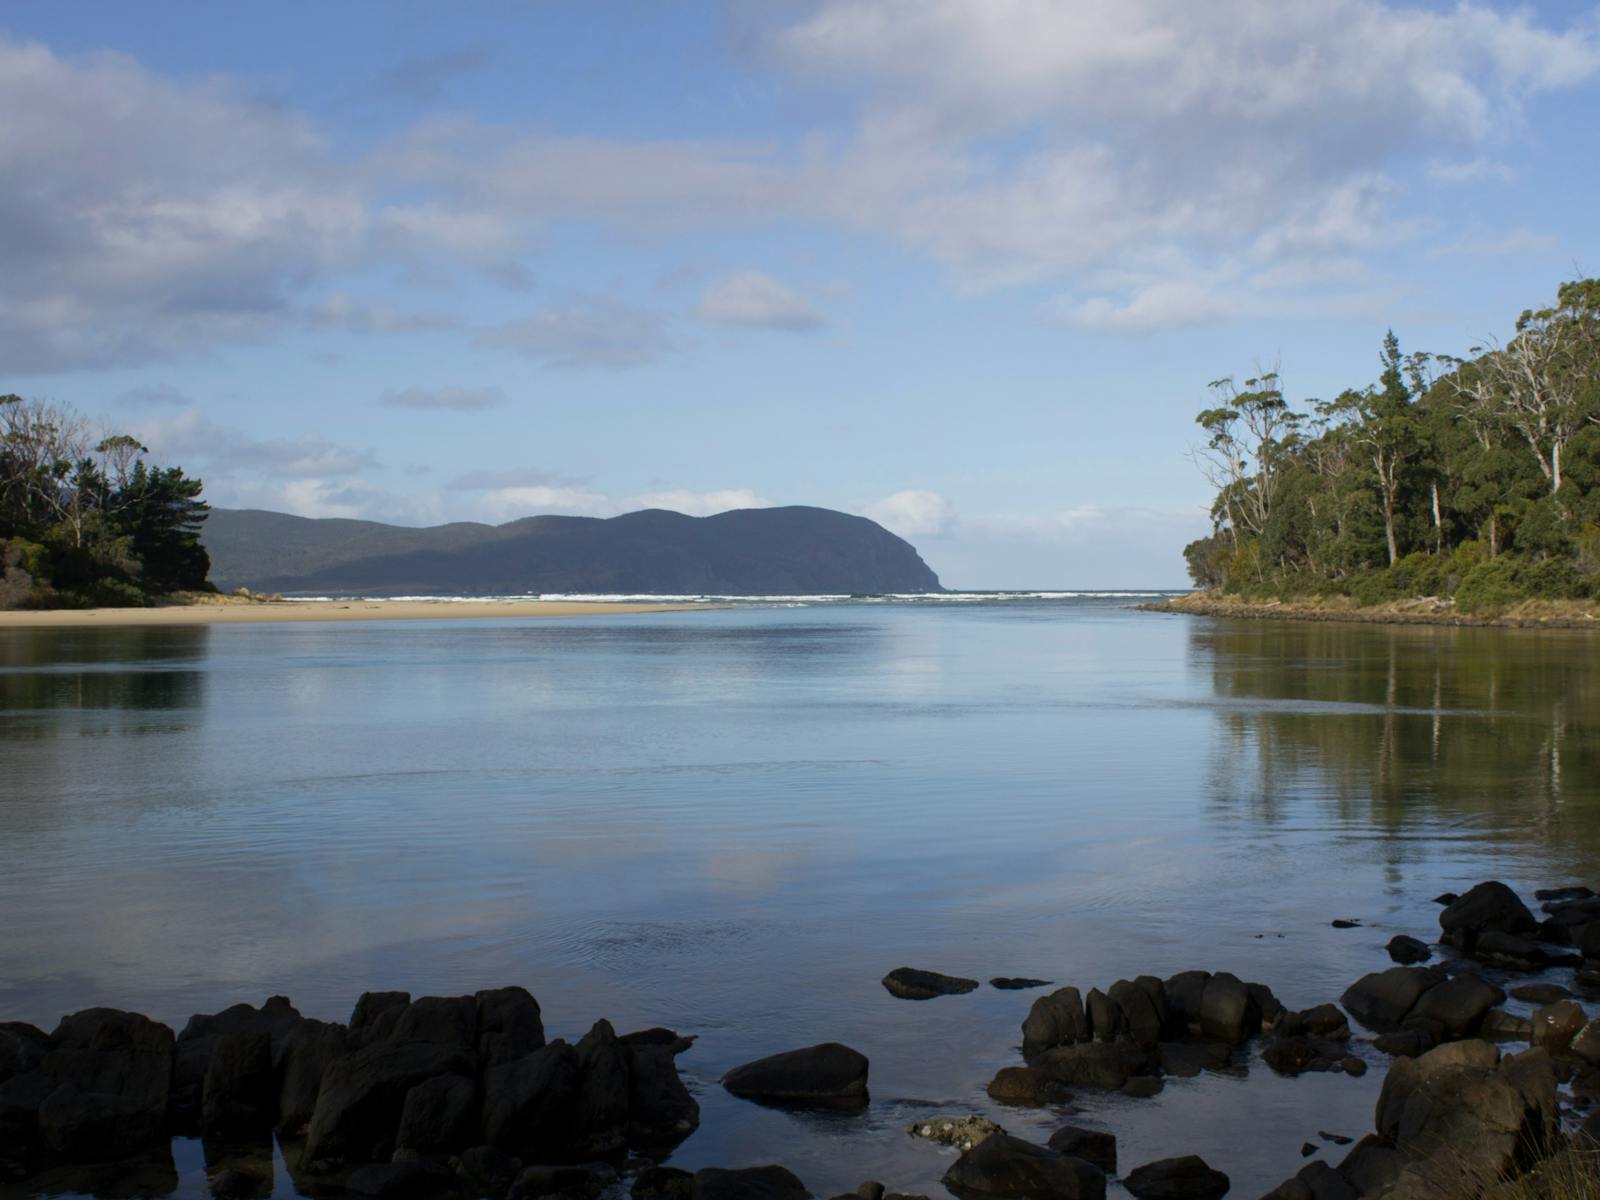 Discover the hidden treasures of Bruny Island with Adventure Trails Tasmania